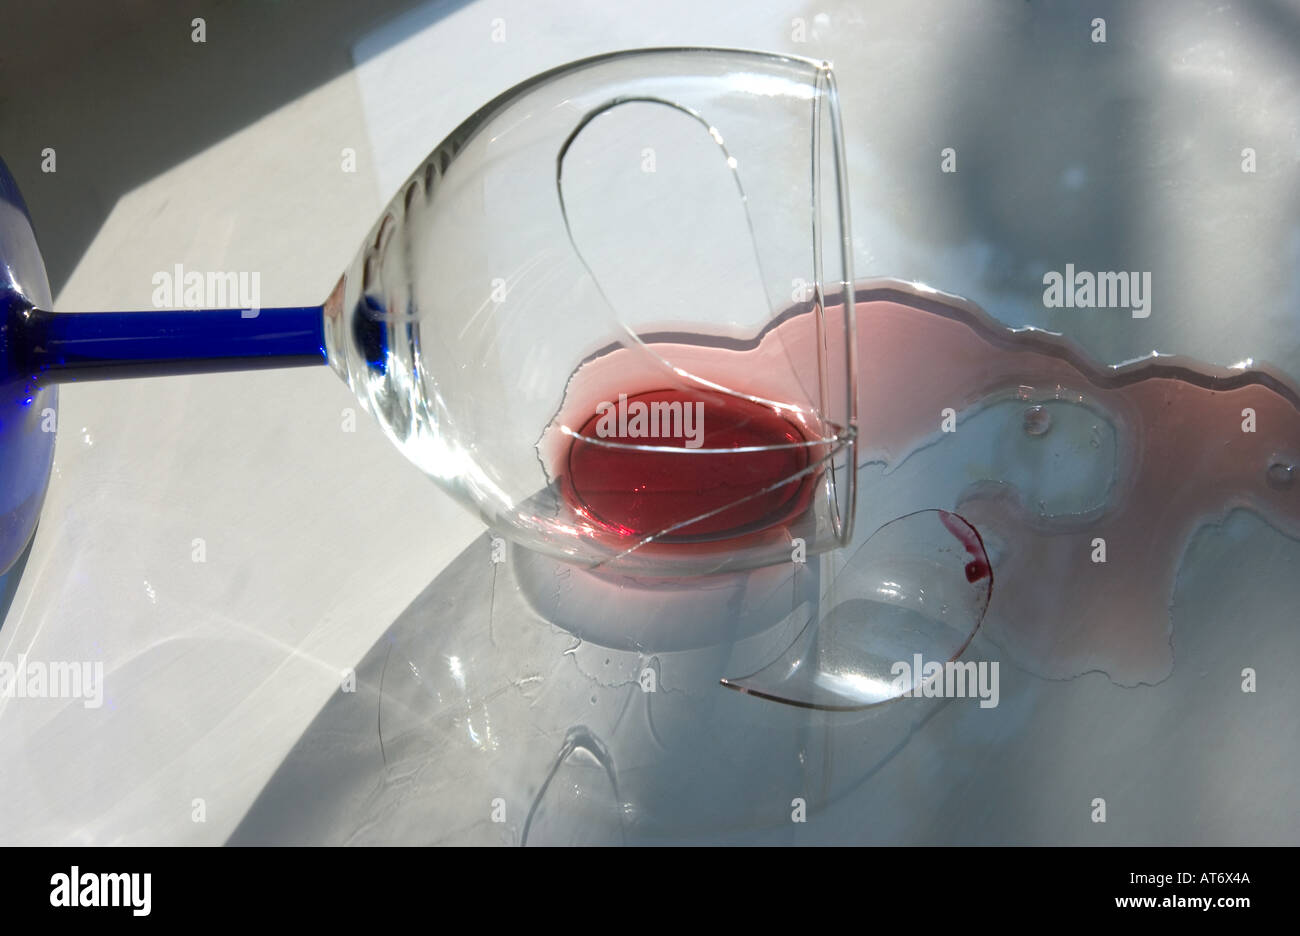 A blue stemmed wineglass broken and spilling the remains of a glass of red wine Stock Photo